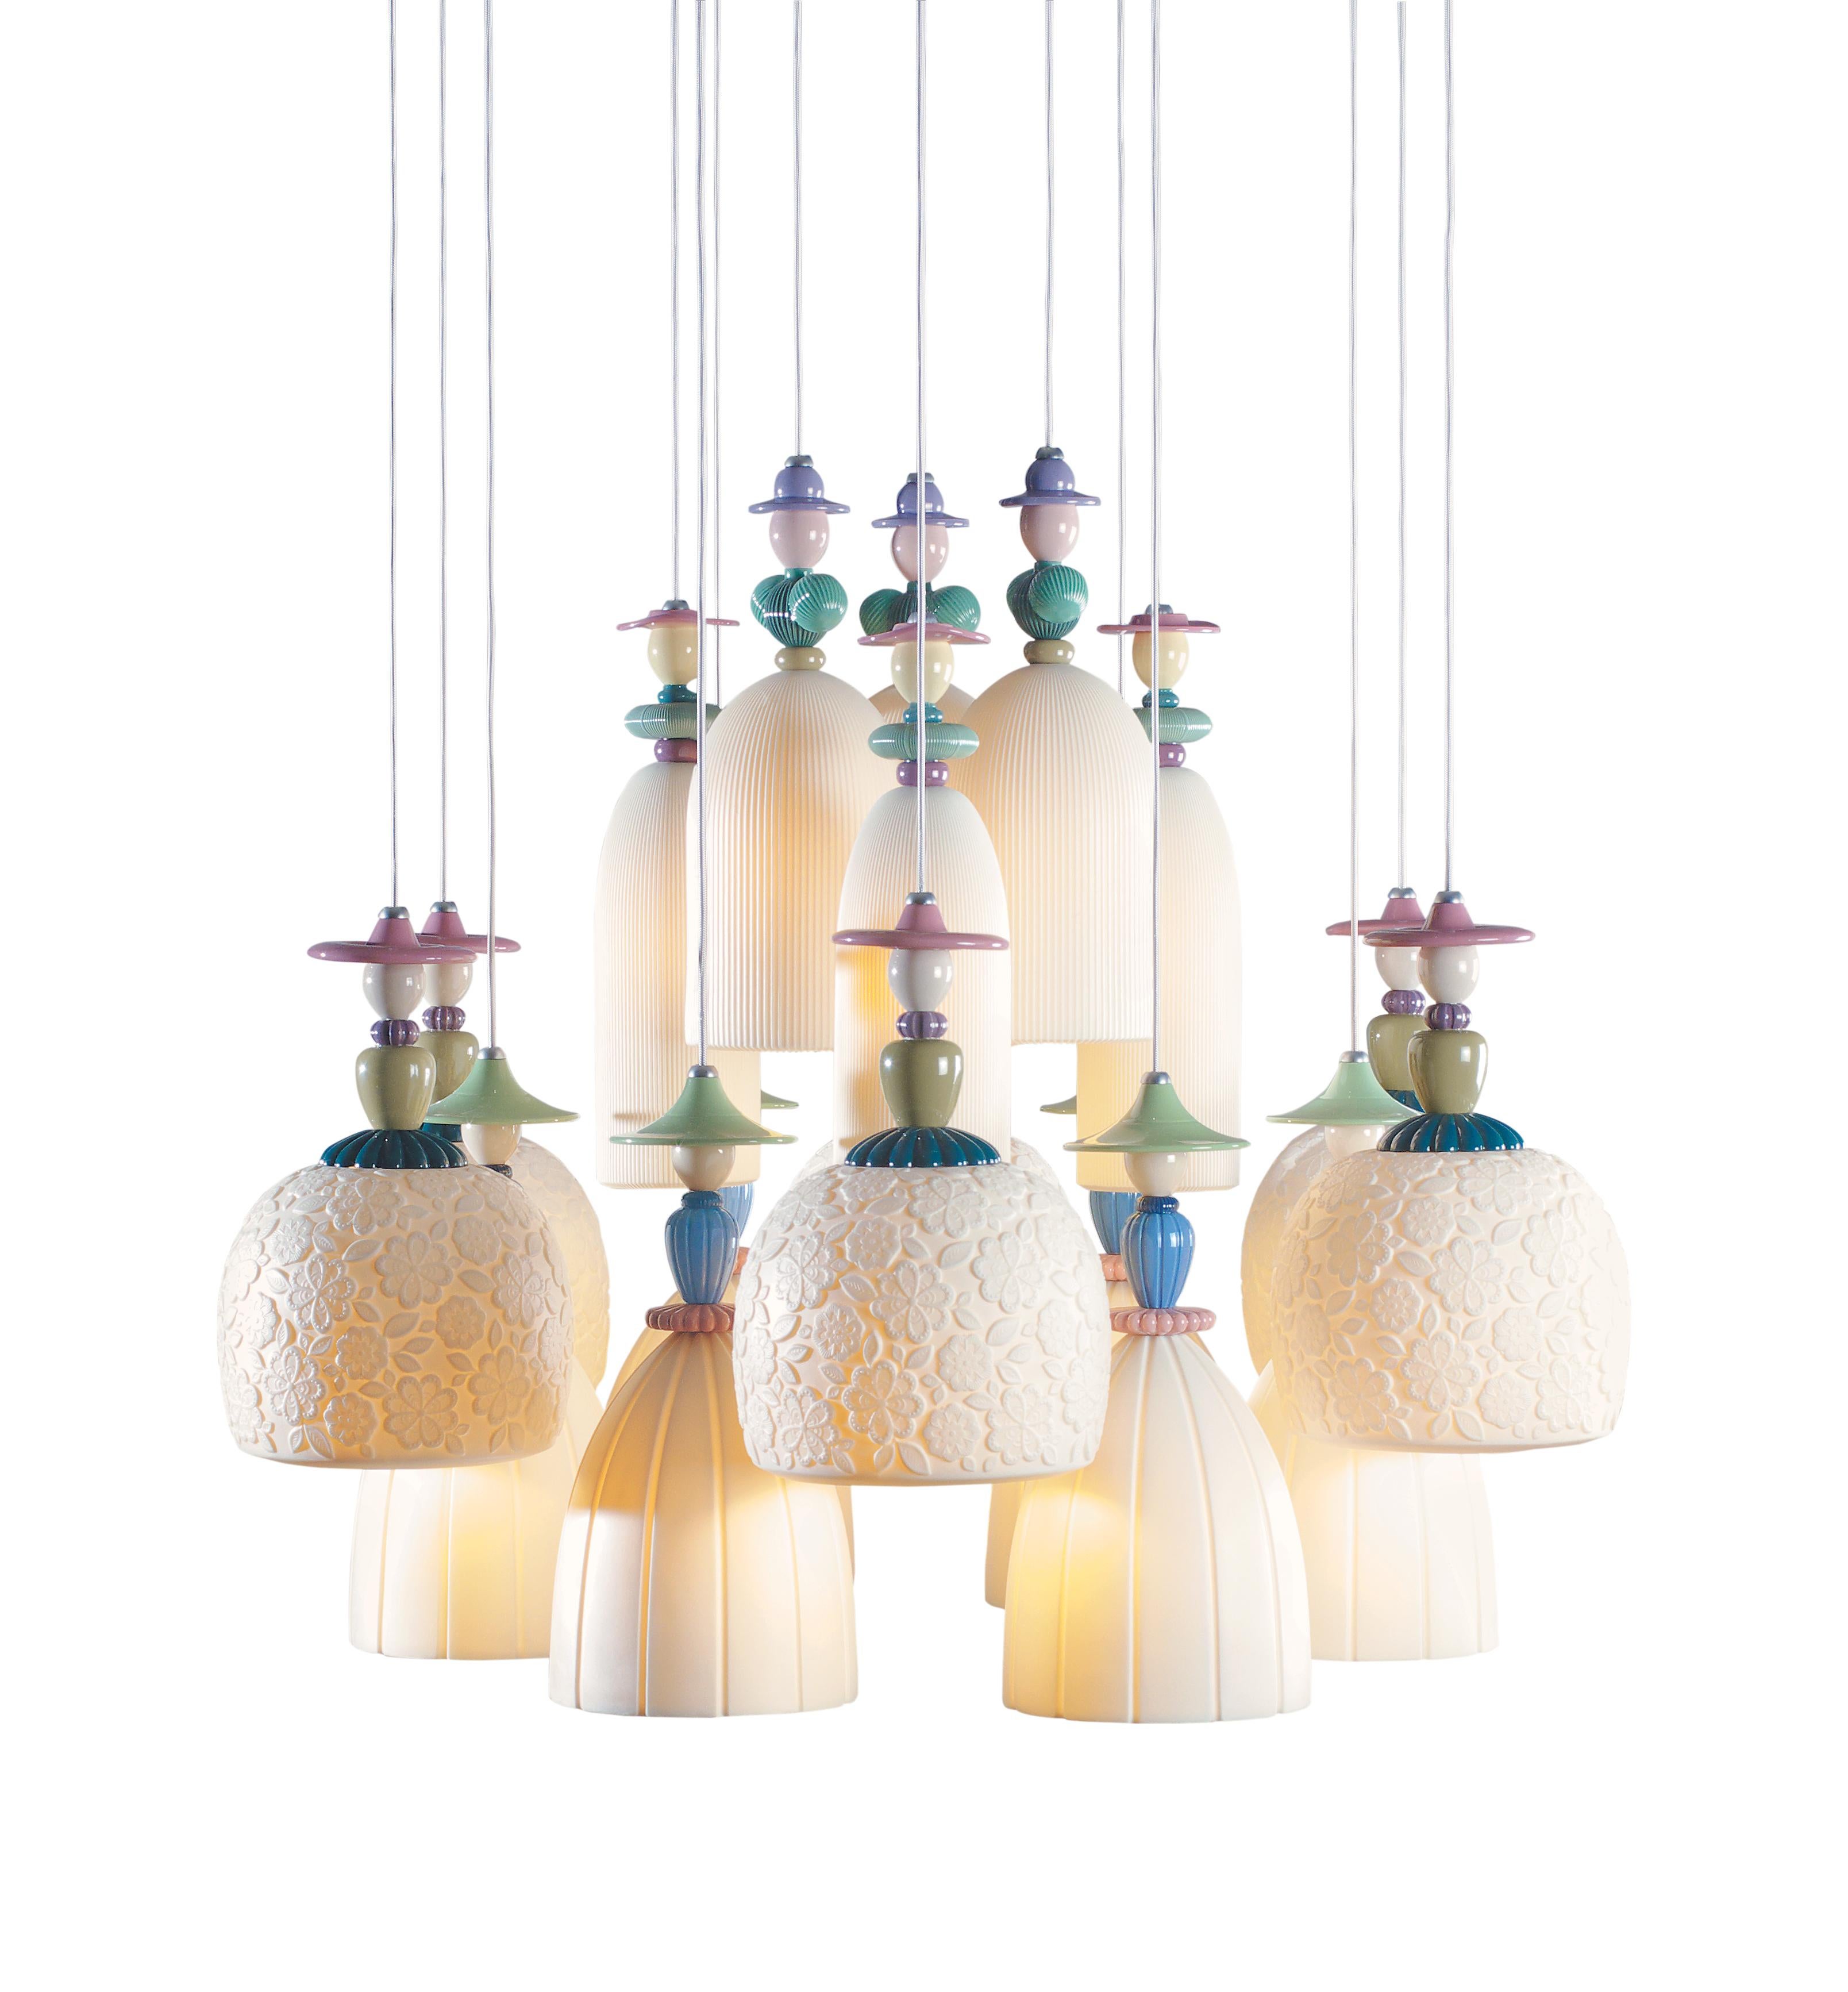 Handmade hanging ceiling lamp in brightly colored porcelain and flower decorations with eighteen engraved translucent white porcelain tulips. The Mademoiselle collection is inspired by Lladró's romantic ladies, one of his most traditional motifs, to